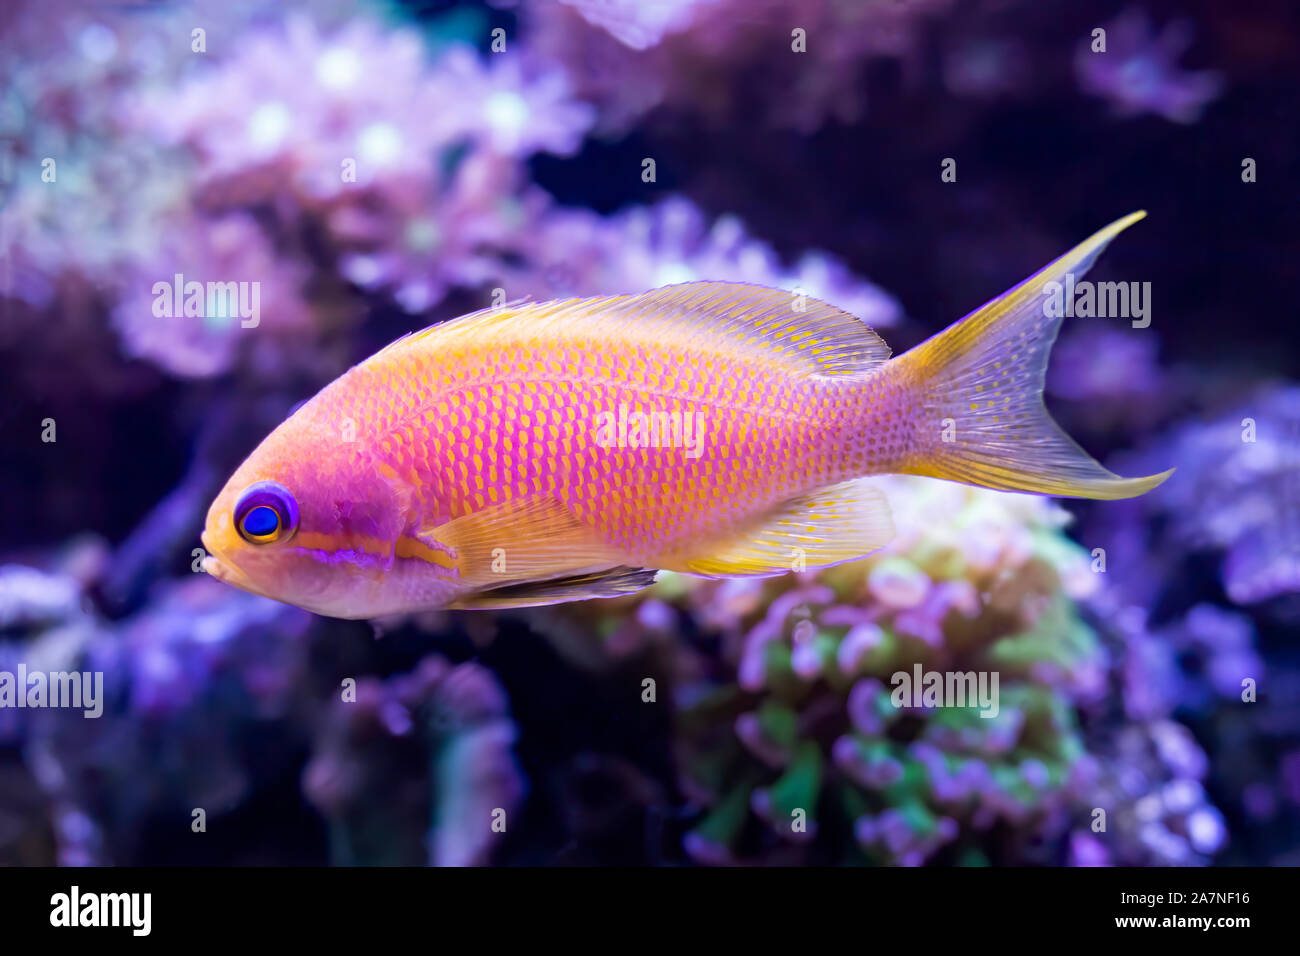 Closeup detail of blue eyed anthias tropical fish in aquarium with corals.  Image details fins tail and eyes of pink and yellow fish Stock Photo - Alamy